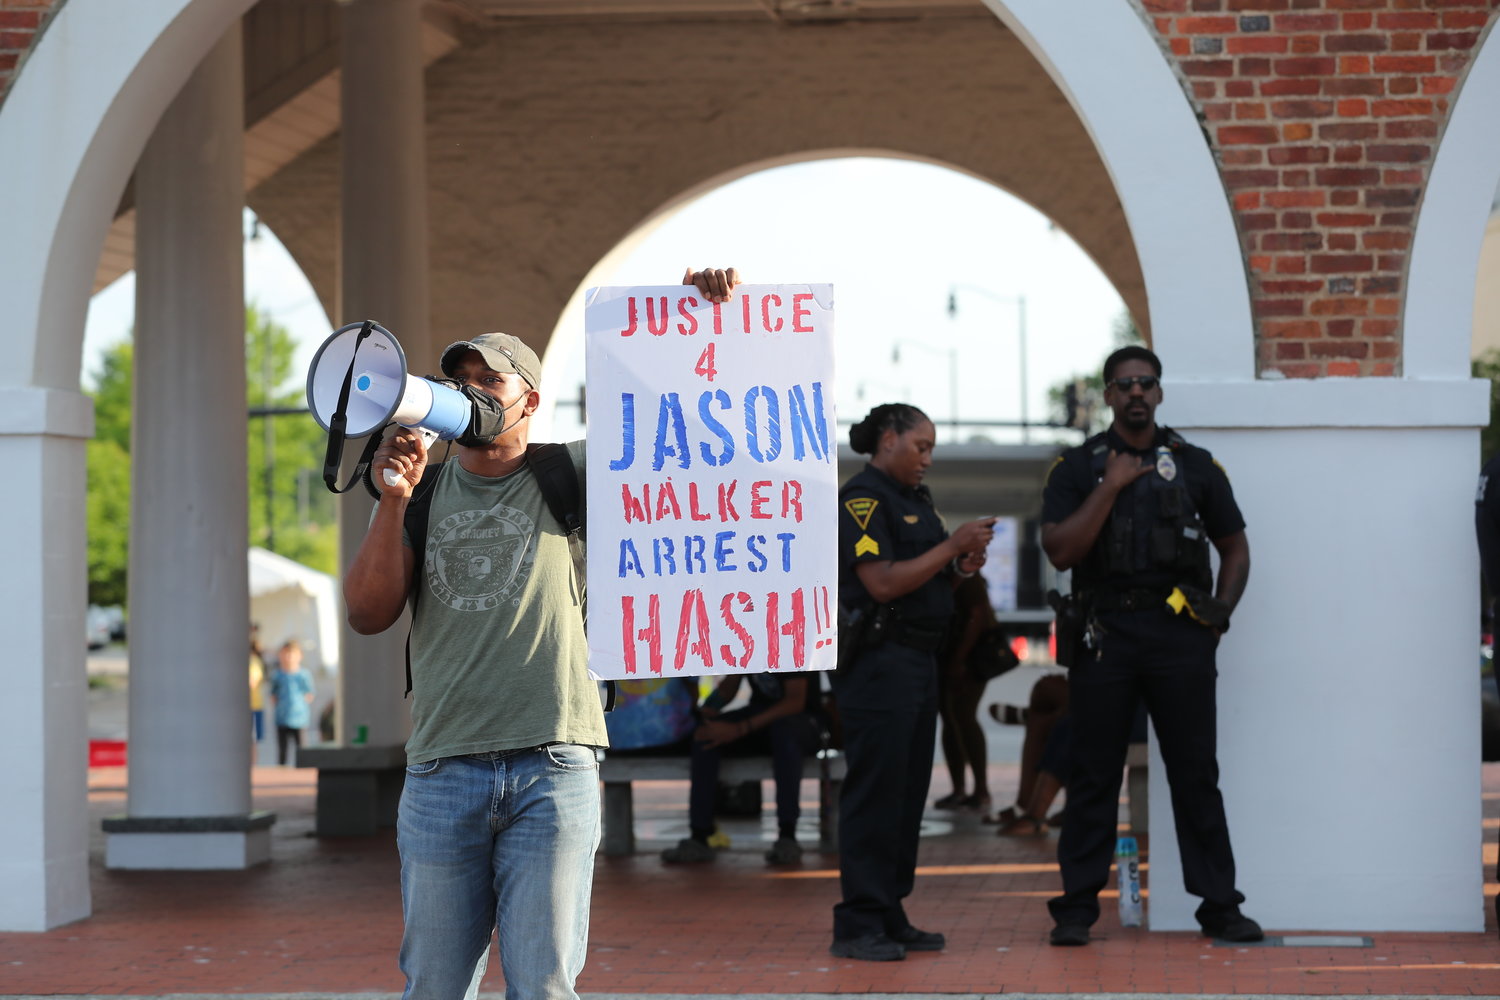 Activist Shaun McMillan organized a protest at the Market House on Saturday to demonstrate against a decision by a special prosecutor not to charge a deputy in the shooting death of Jason Walker.